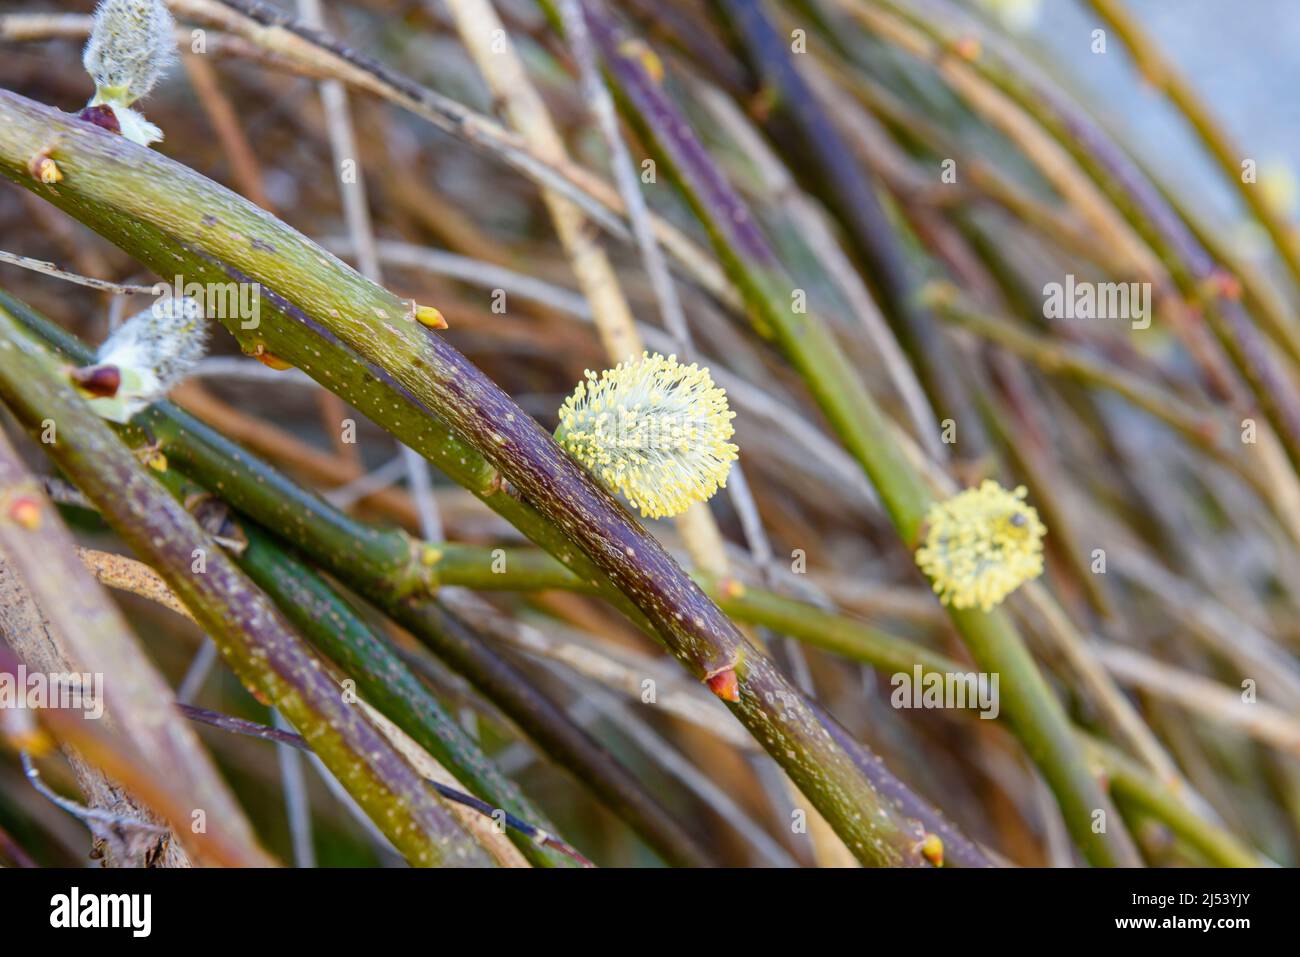 Male catkin flowers on the branches of a willow tree. Stock Photo